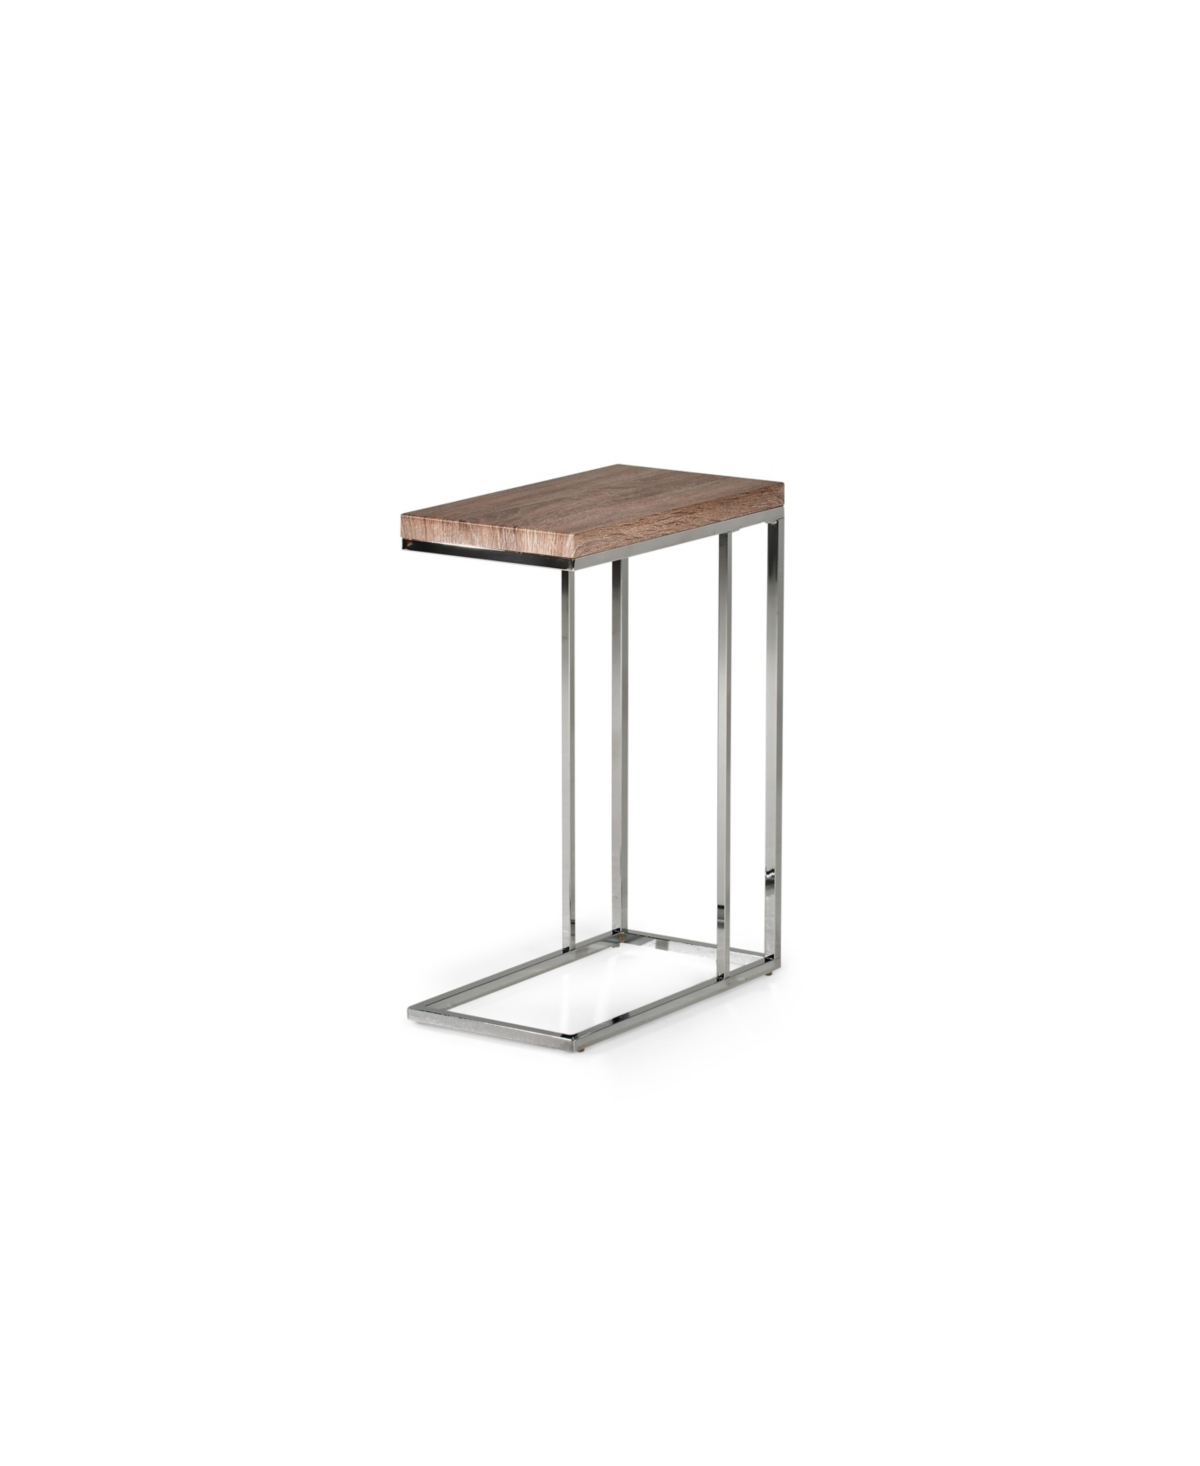 Steve Silver Lucia 10" X 18" Laminate Chairside End Table In Light Driftwood Brown And Chrome